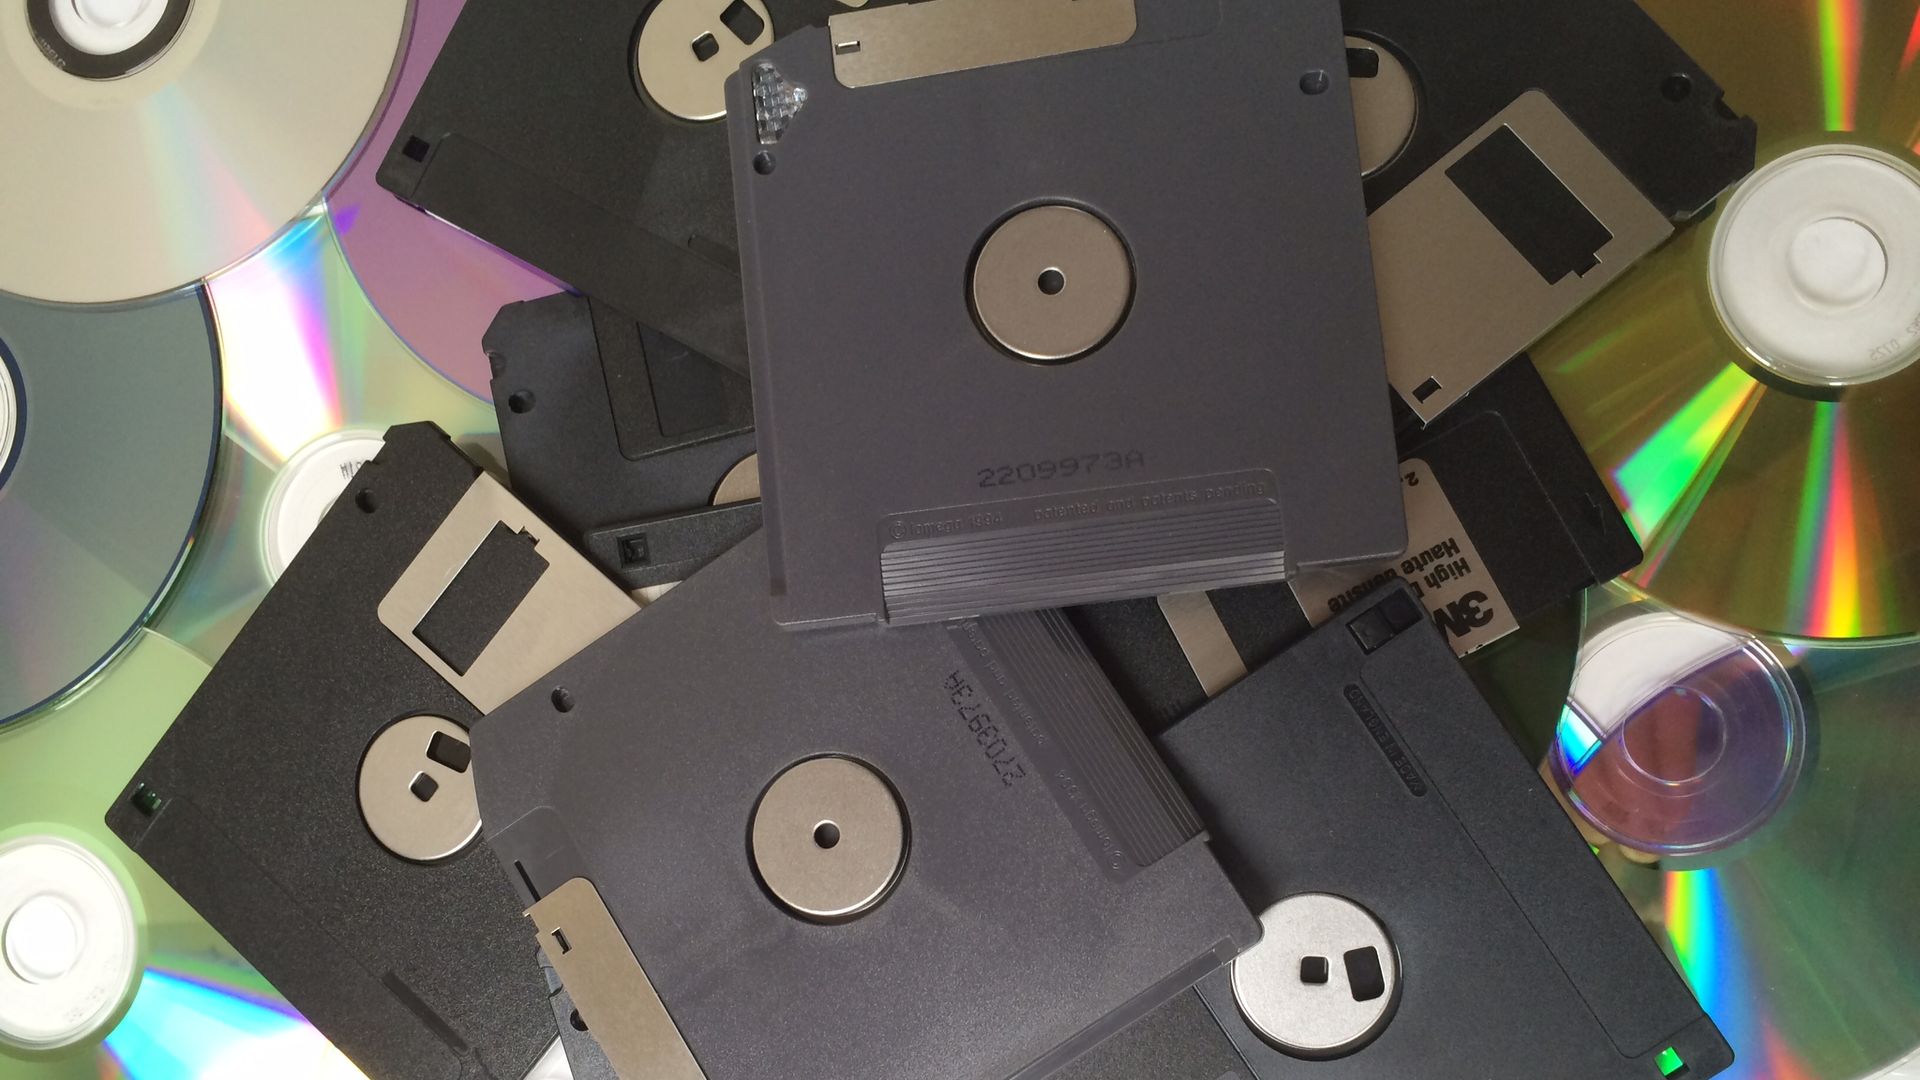 This image is a pile of floppy disks and CD-roms. 